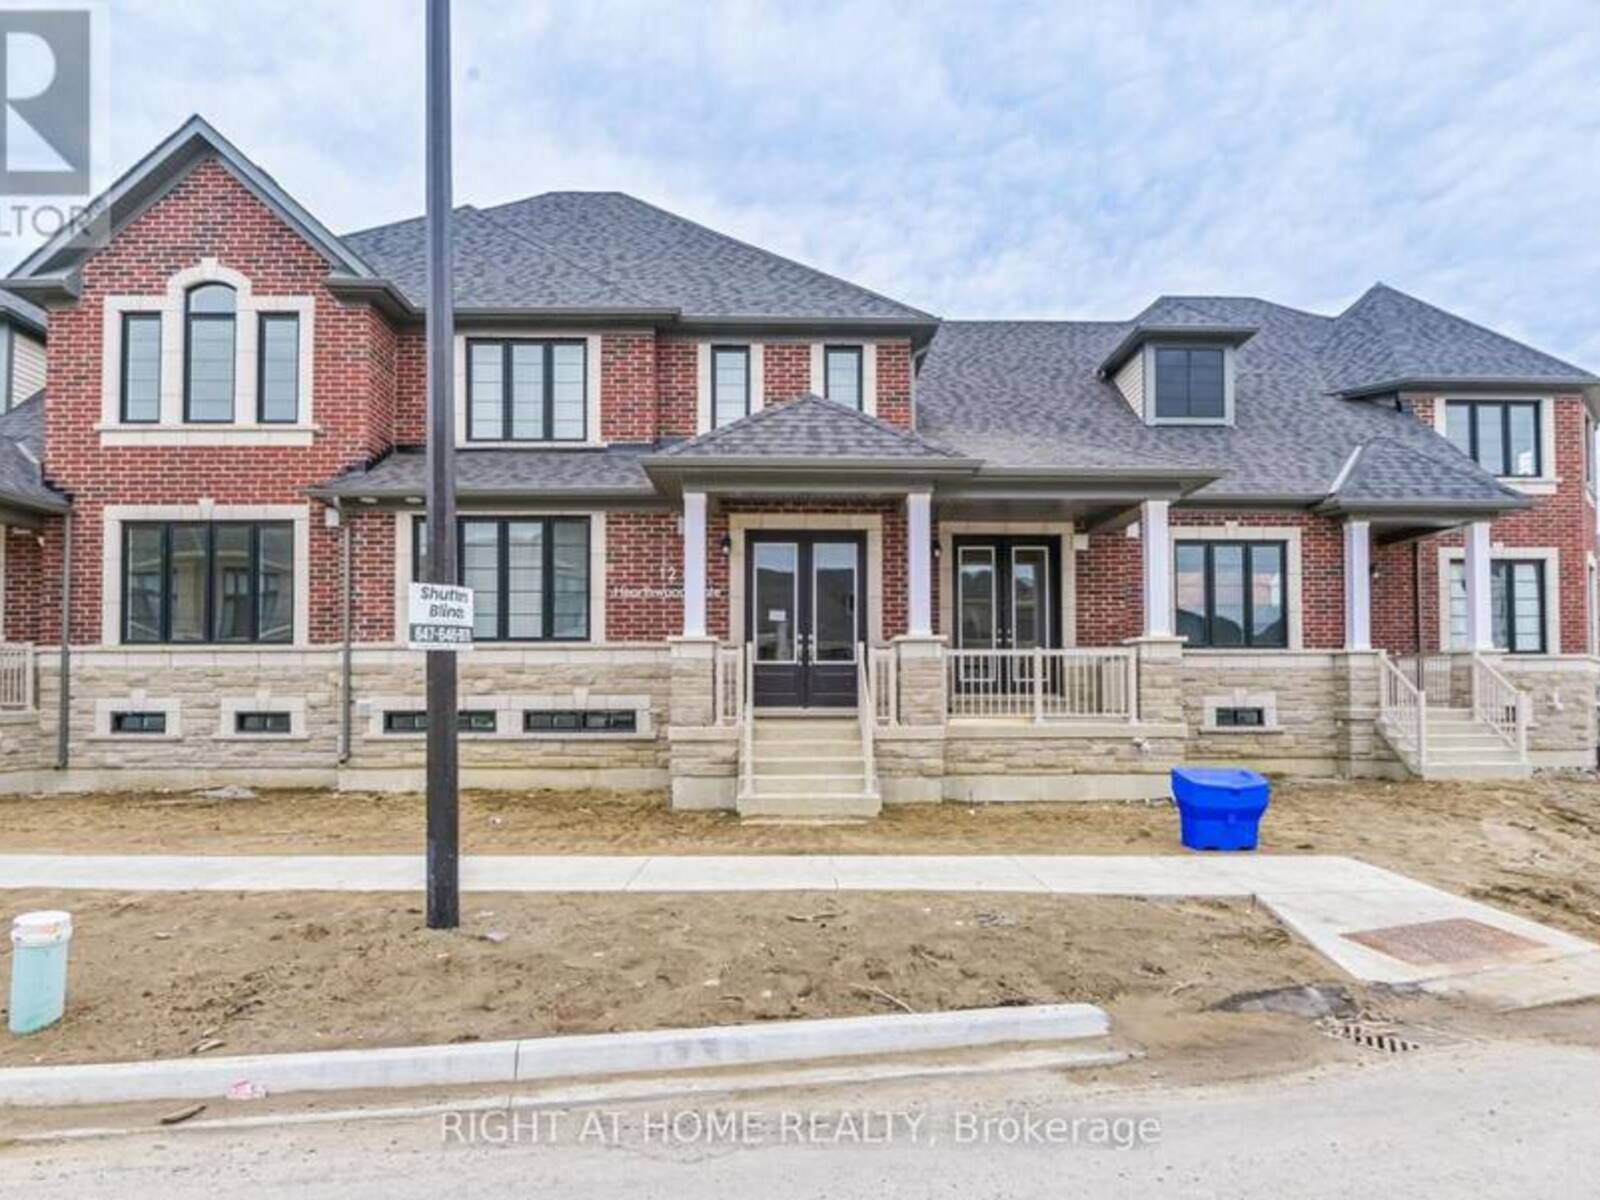 12 HEARTHWOOD GATE, Whitchurch-Stouffville, Ontario L4A 4X1